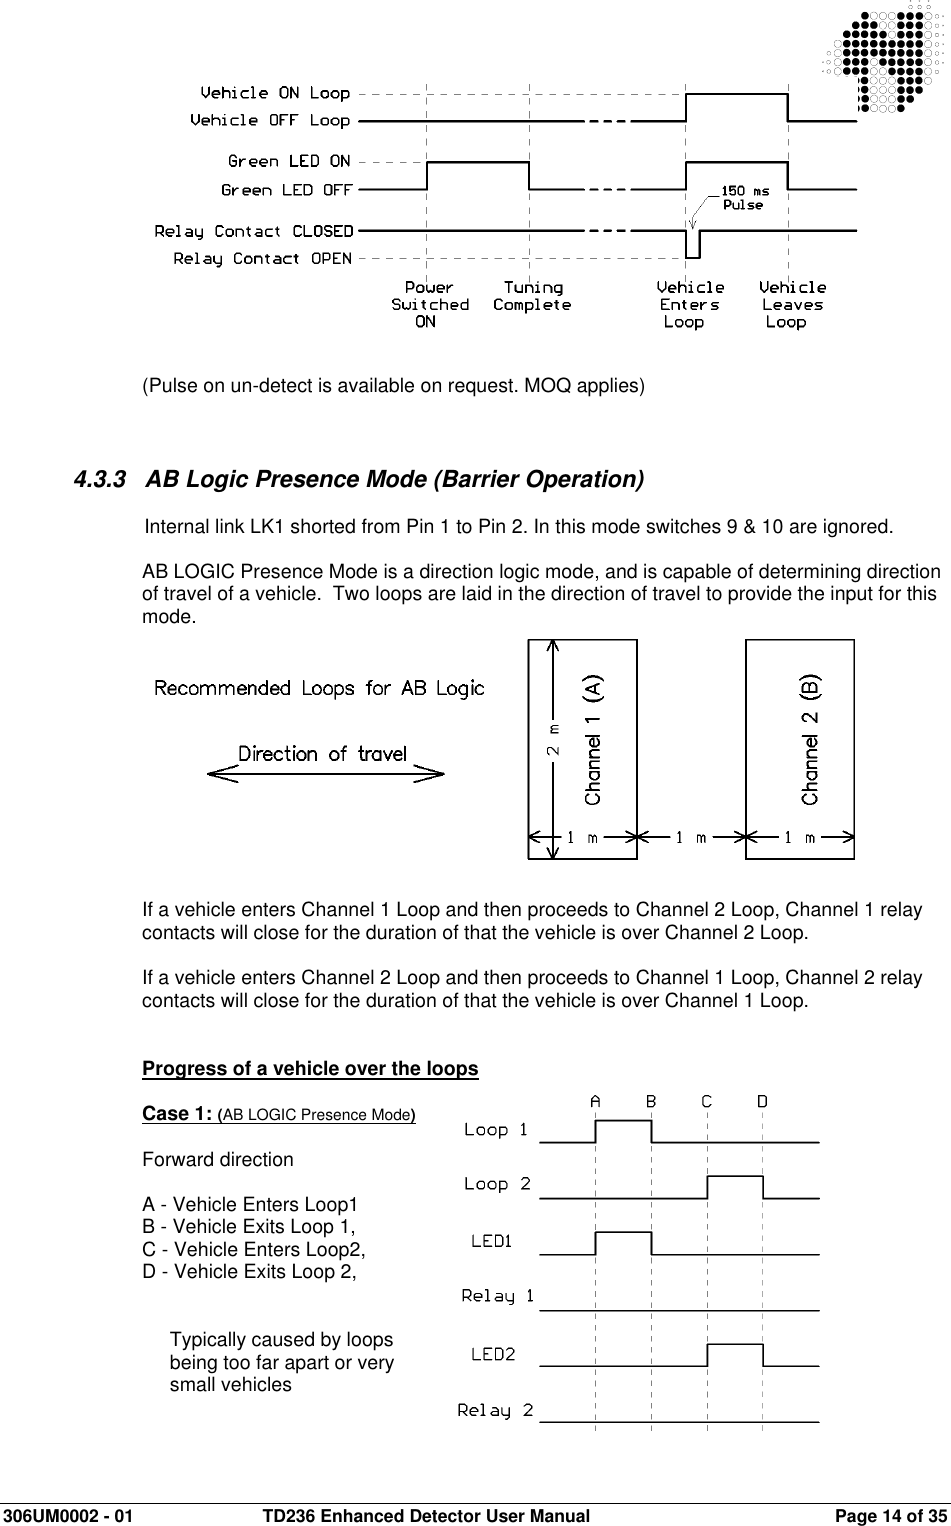  306UM0002 - 01  TD236 Enhanced Detector User Manual   Page 14 of 35                (Pulse on un-detect is available on request. MOQ applies)    4.3.3  AB Logic Presence Mode (Barrier Operation)    Internal link LK1 shorted from Pin 1 to Pin 2. In this mode switches 9 &amp; 10 are ignored.  AB LOGIC Presence Mode is a direction logic mode, and is capable of determining direction of travel of a vehicle.  Two loops are laid in the direction of travel to provide the input for this mode.             If a vehicle enters Channel 1 Loop and then proceeds to Channel 2 Loop, Channel 1 relay contacts will close for the duration of that the vehicle is over Channel 2 Loop.  If a vehicle enters Channel 2 Loop and then proceeds to Channel 1 Loop, Channel 2 relay contacts will close for the duration of that the vehicle is over Channel 1 Loop.   Progress of a vehicle over the loops  Case 1: (AB LOGIC Presence Mode)  Forward direction  A - Vehicle Enters Loop1 B - Vehicle Exits Loop 1, C - Vehicle Enters Loop2,  D - Vehicle Exits Loop 2,   Typically caused by loops  being too far apart or very  small vehicles   